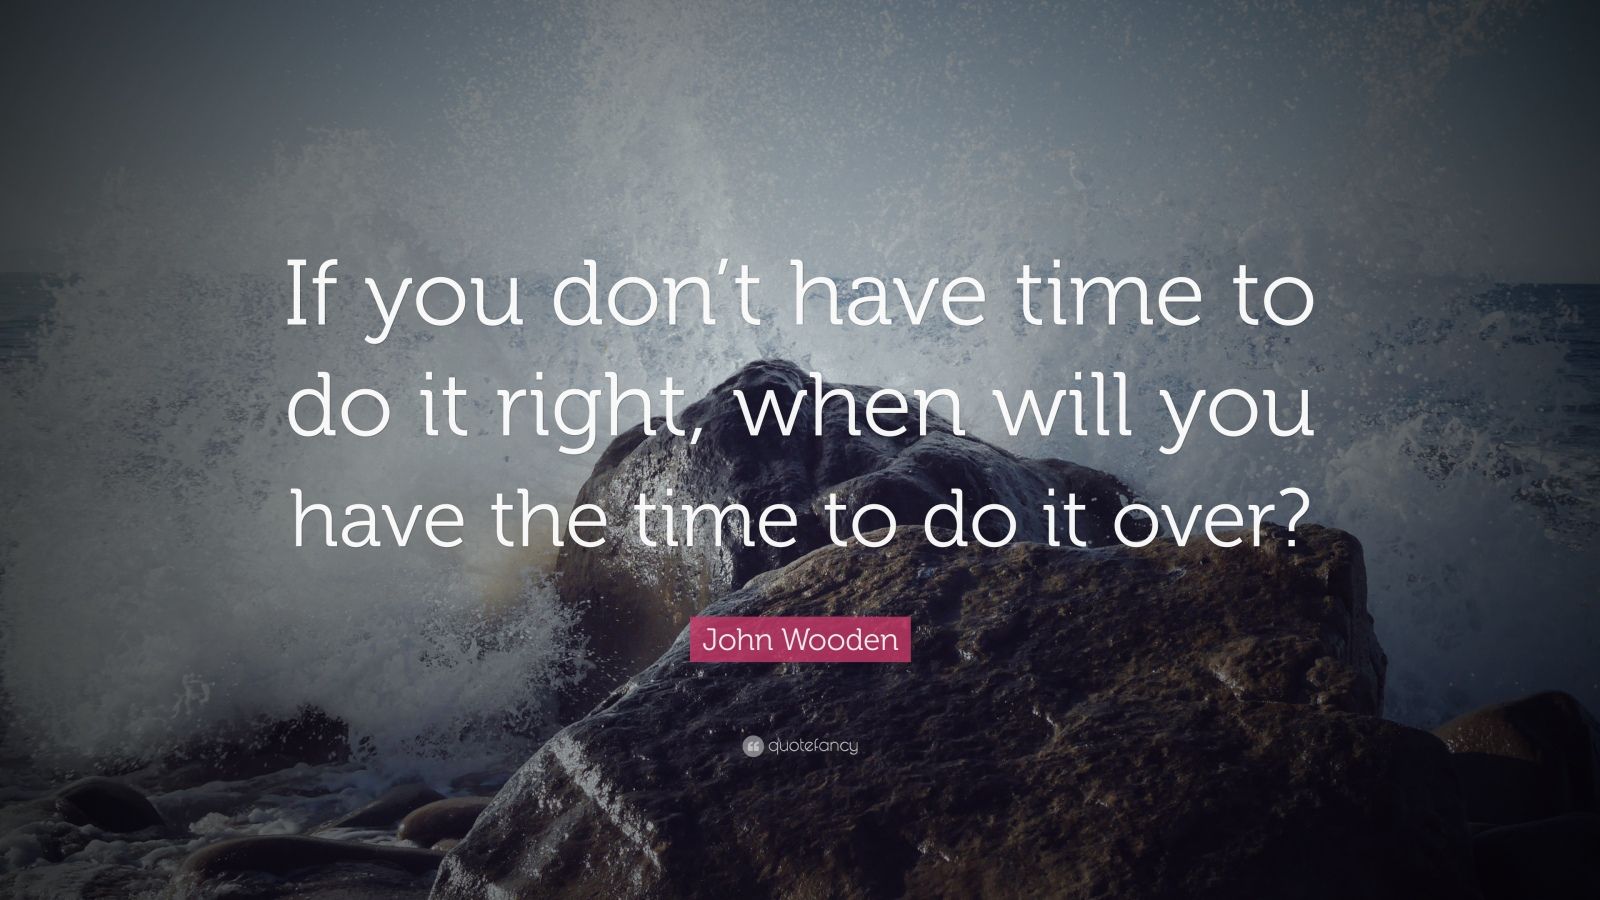 John Wooden Quote: “If you don’t have time to do it right, when will ...